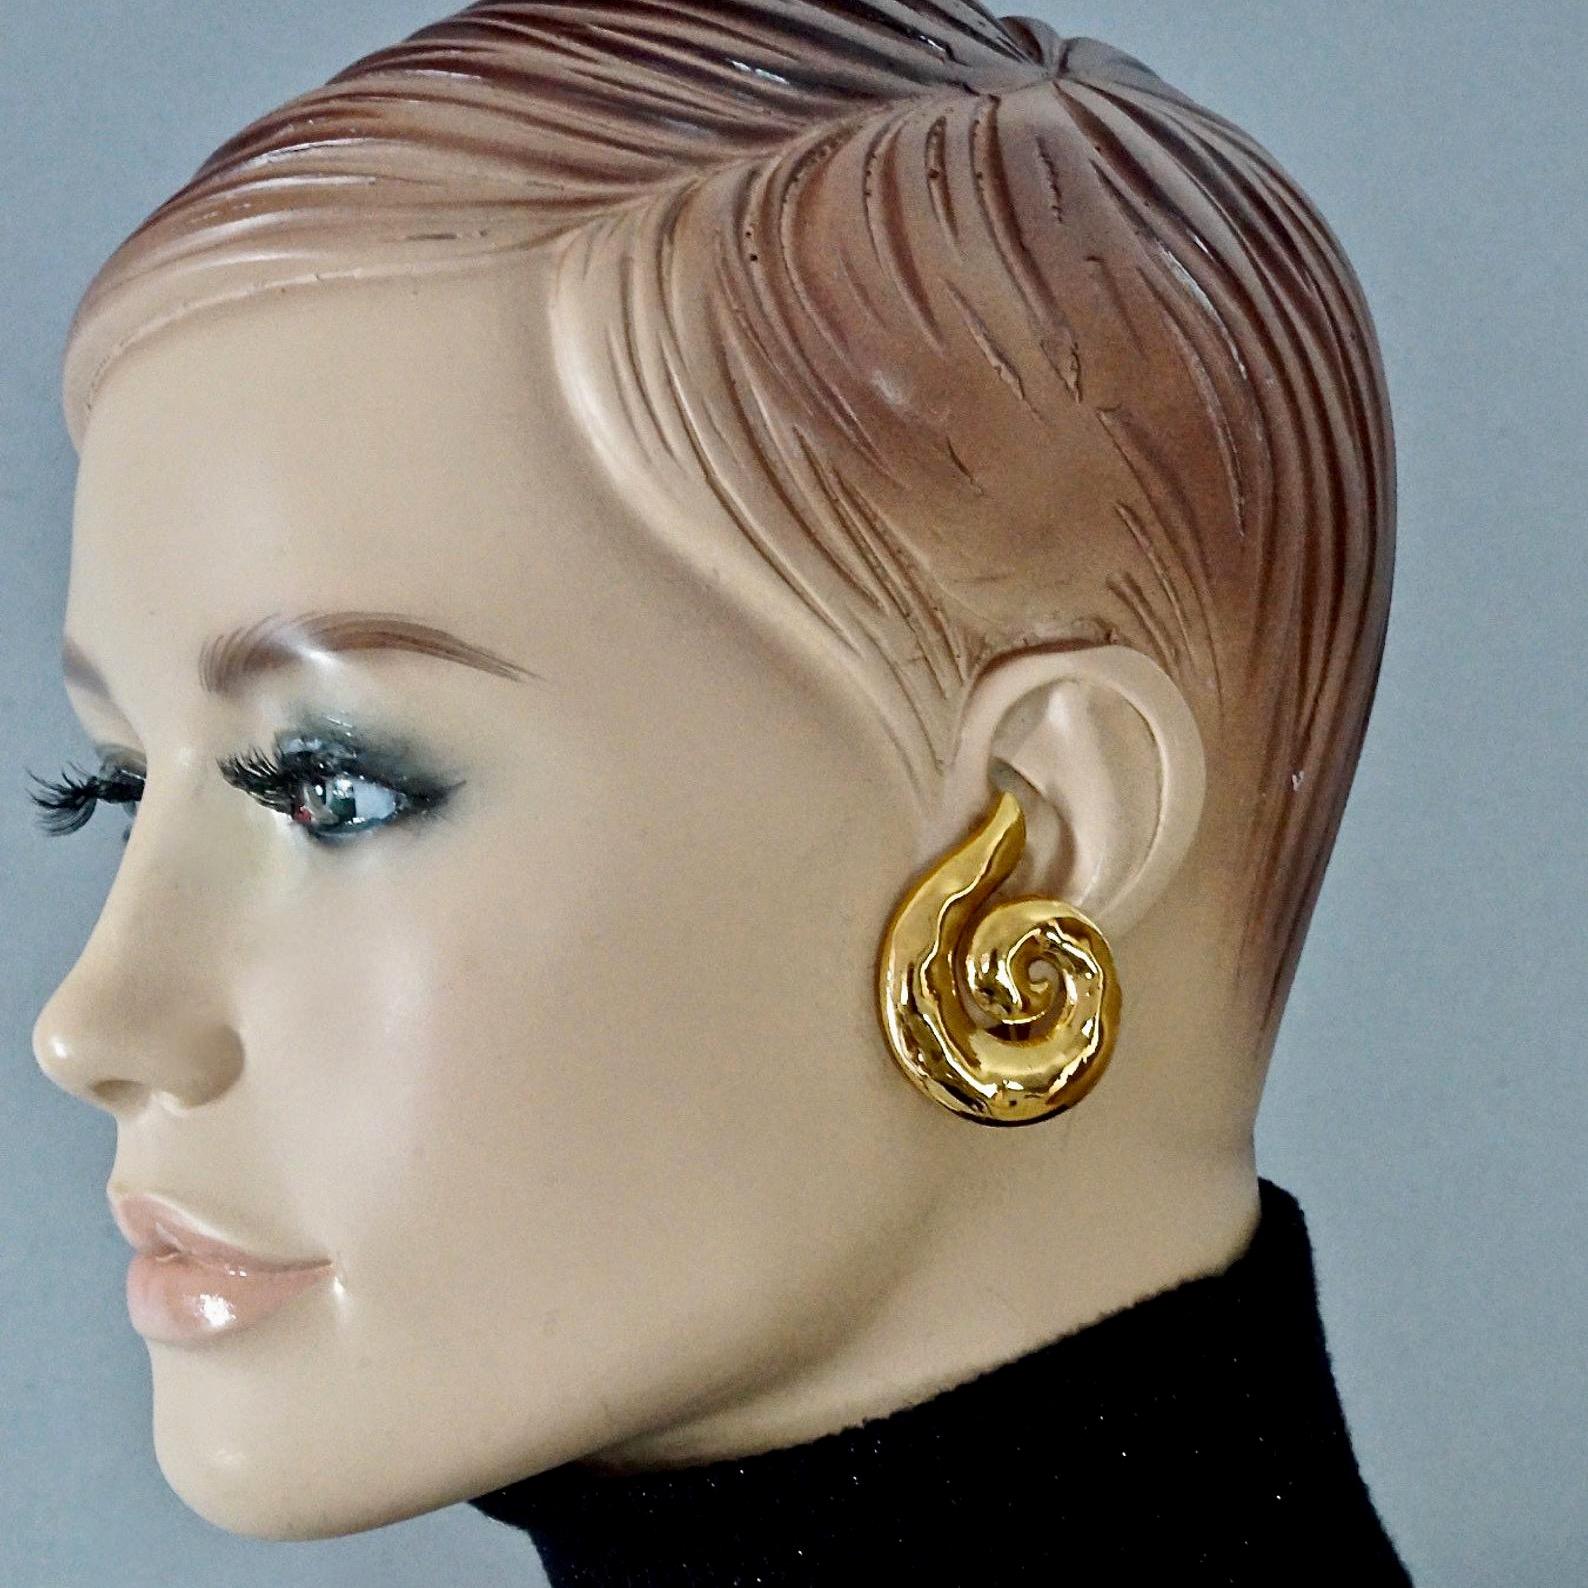 Vintage YVES SAINT LAURENT Ysl Coiled Spiral Earrings

Measurements:
Height: 1.65 inches (4.2 cms)
Width: 1.34 inches (3.4 cms)
Weight per Earring: 12 grams

Features:
- 100% Authentic YVES SAINT LAURENT.
- Coiled spiral hammered gilt earrings.
-